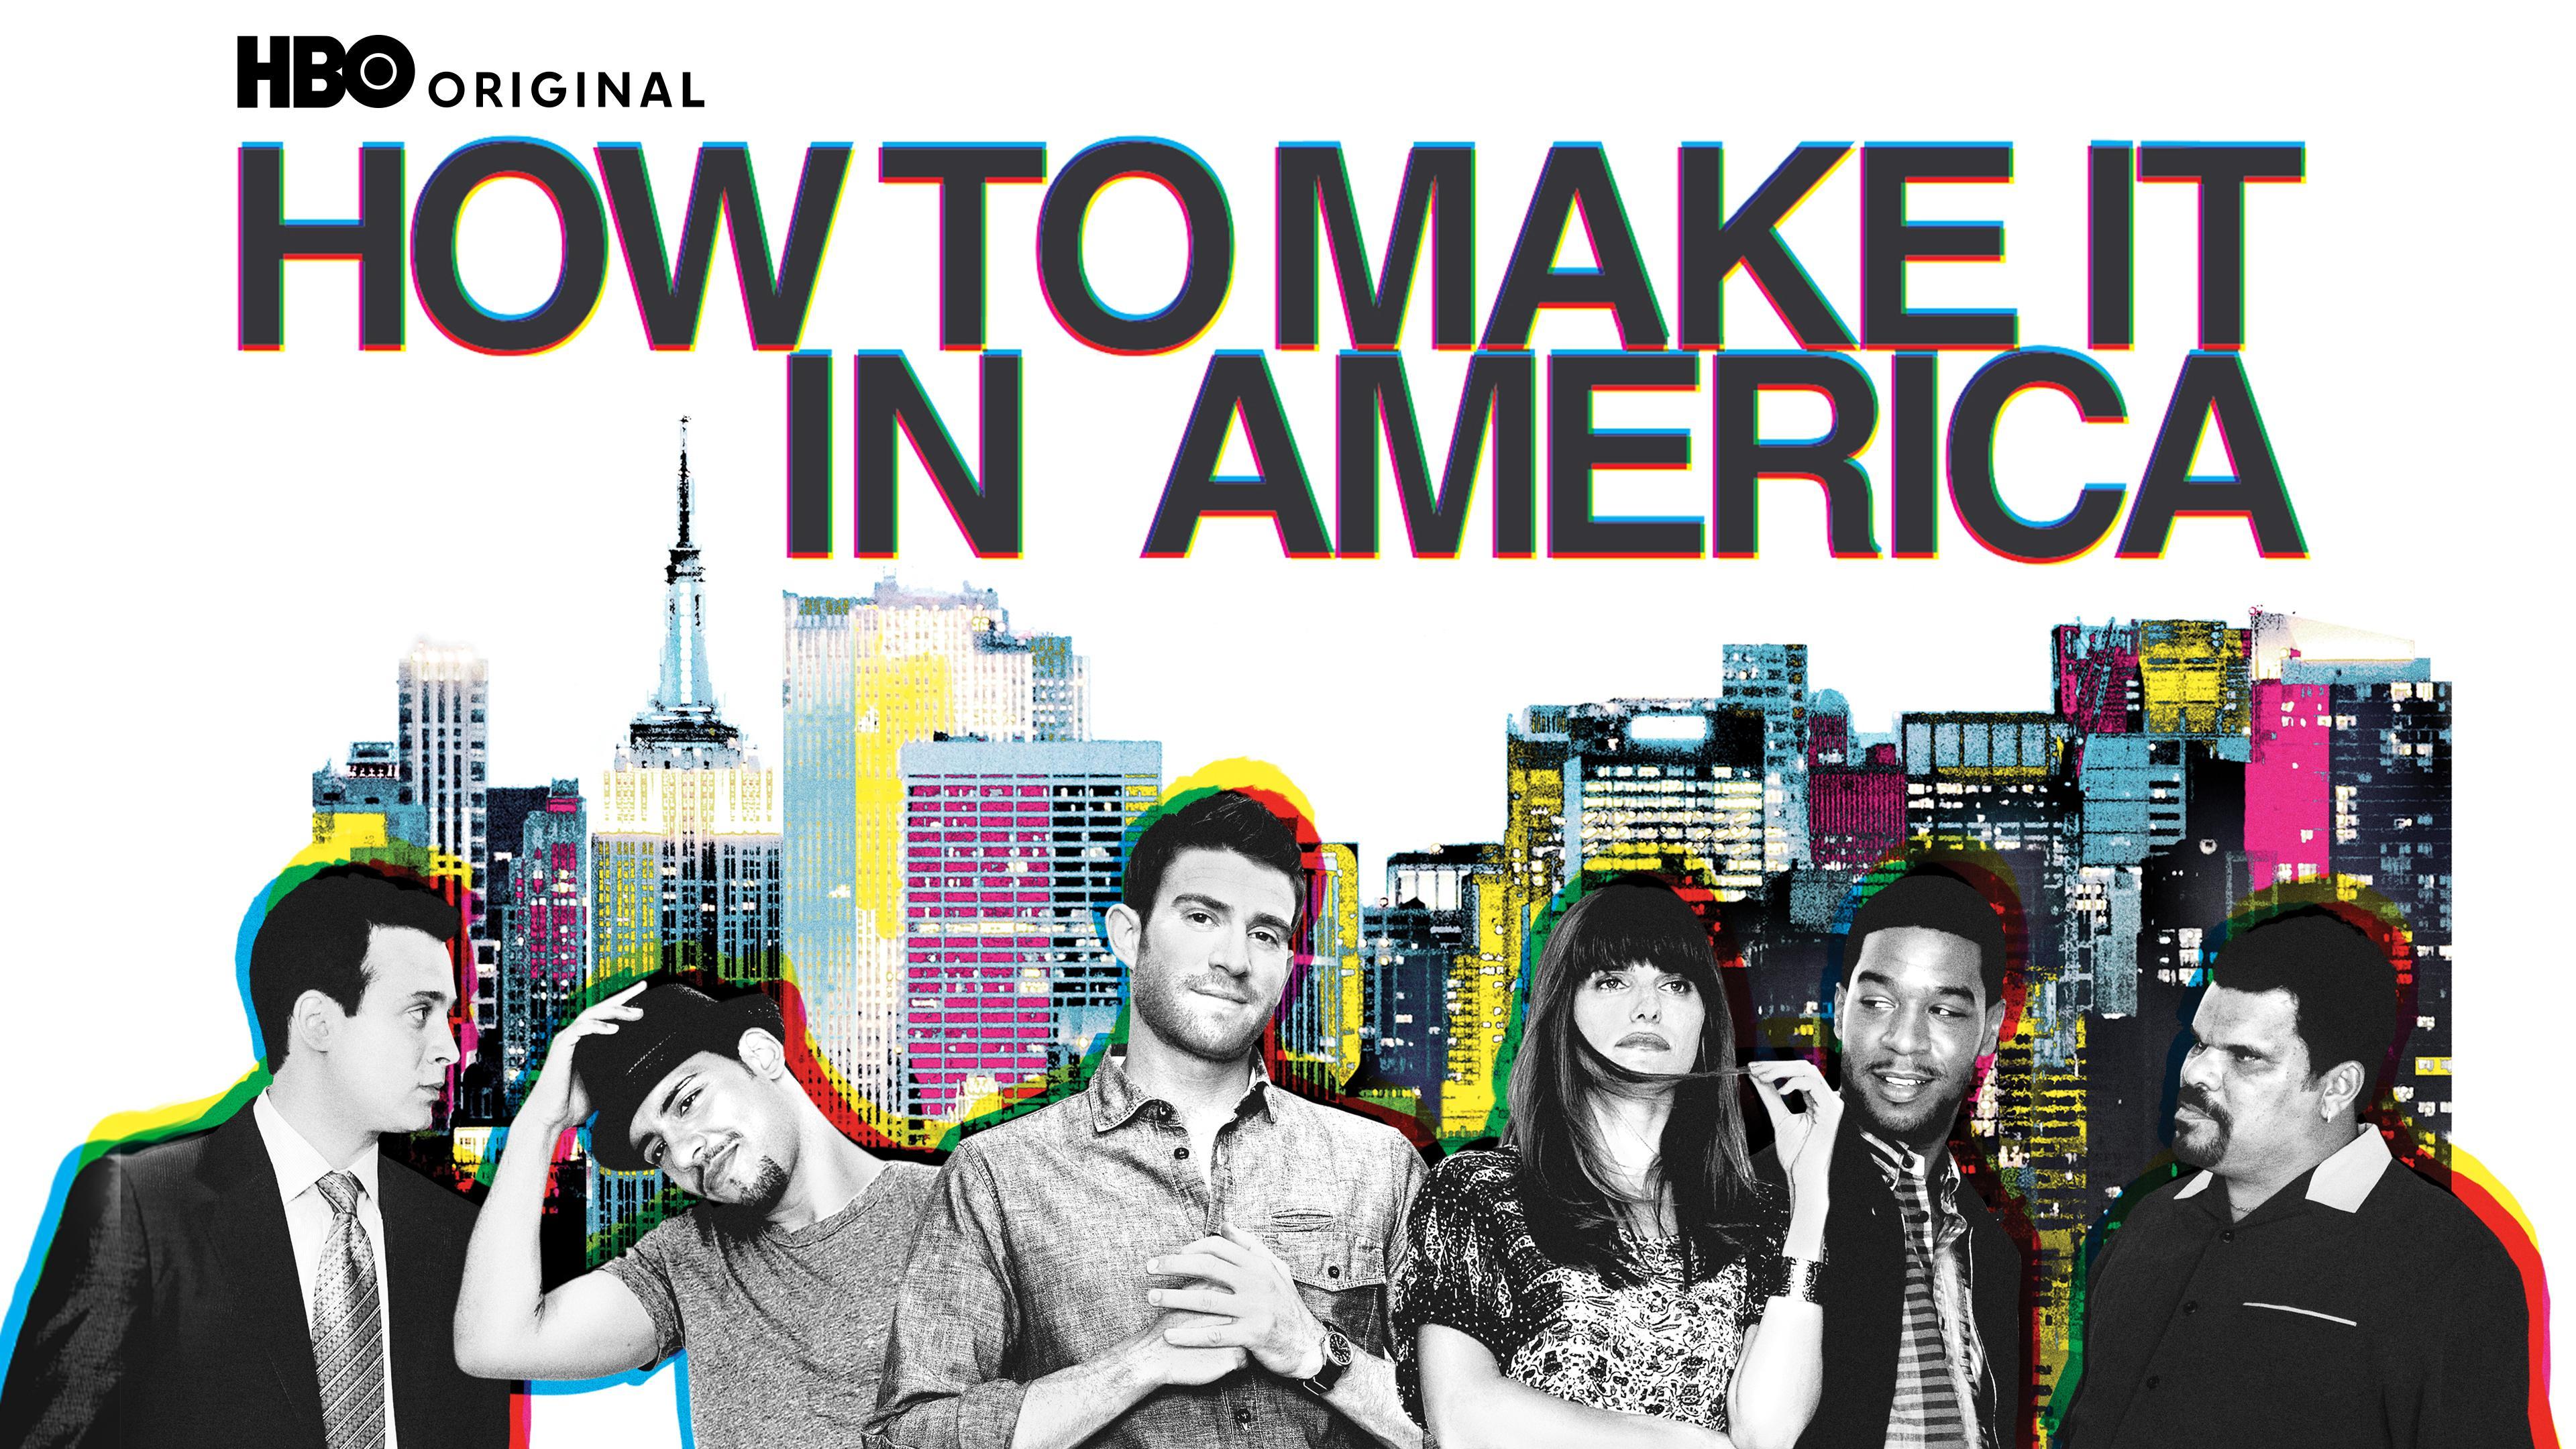 How To Make It In America | Official Website for the HBO Series | HBO.com